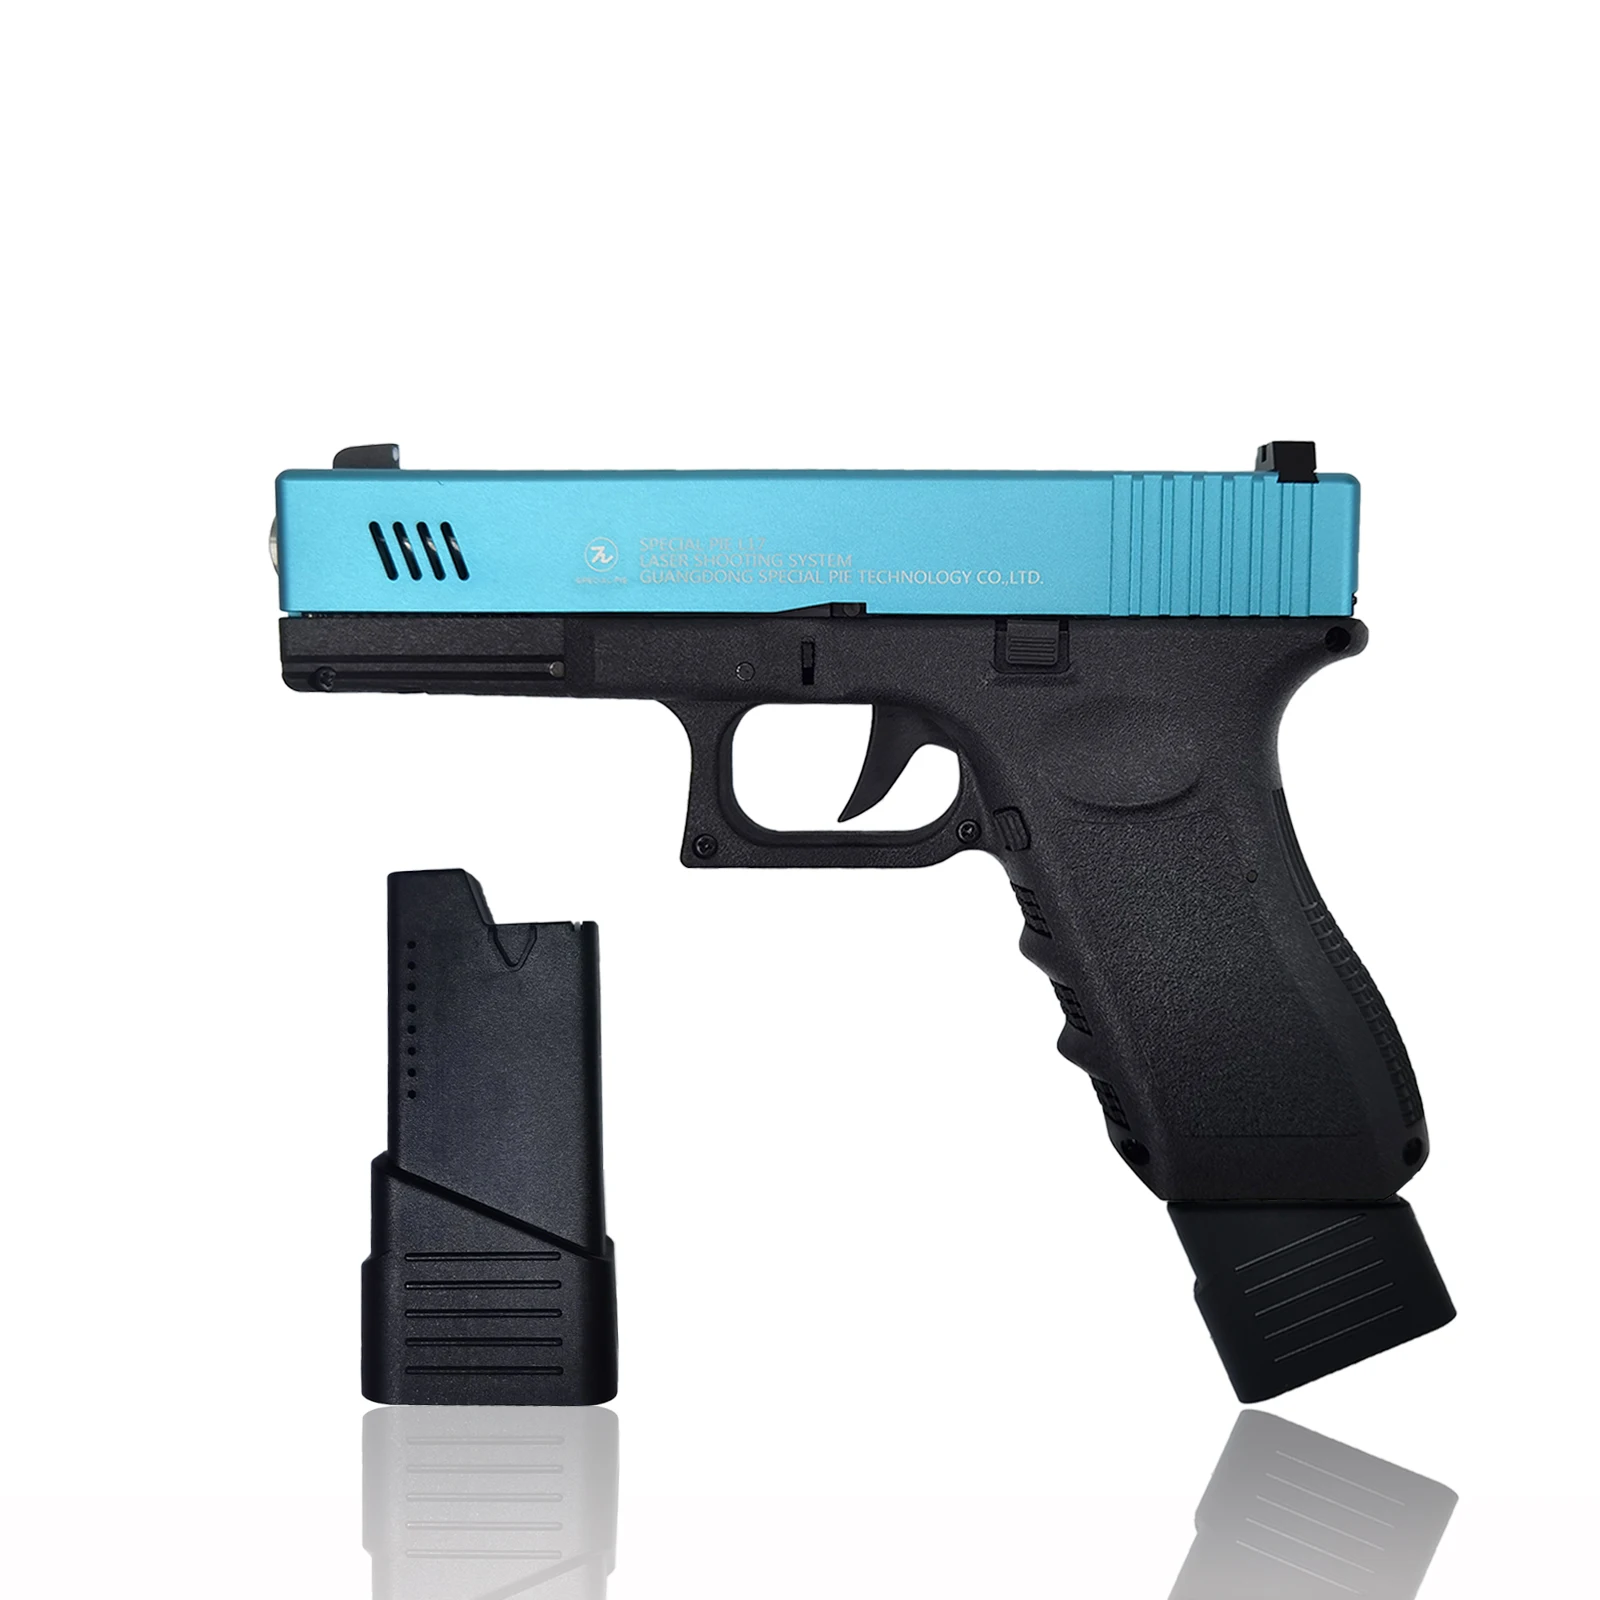 

L17Pro laser shooting dry fire pistol with electronic recoil for shooter indoor training with high accuracy